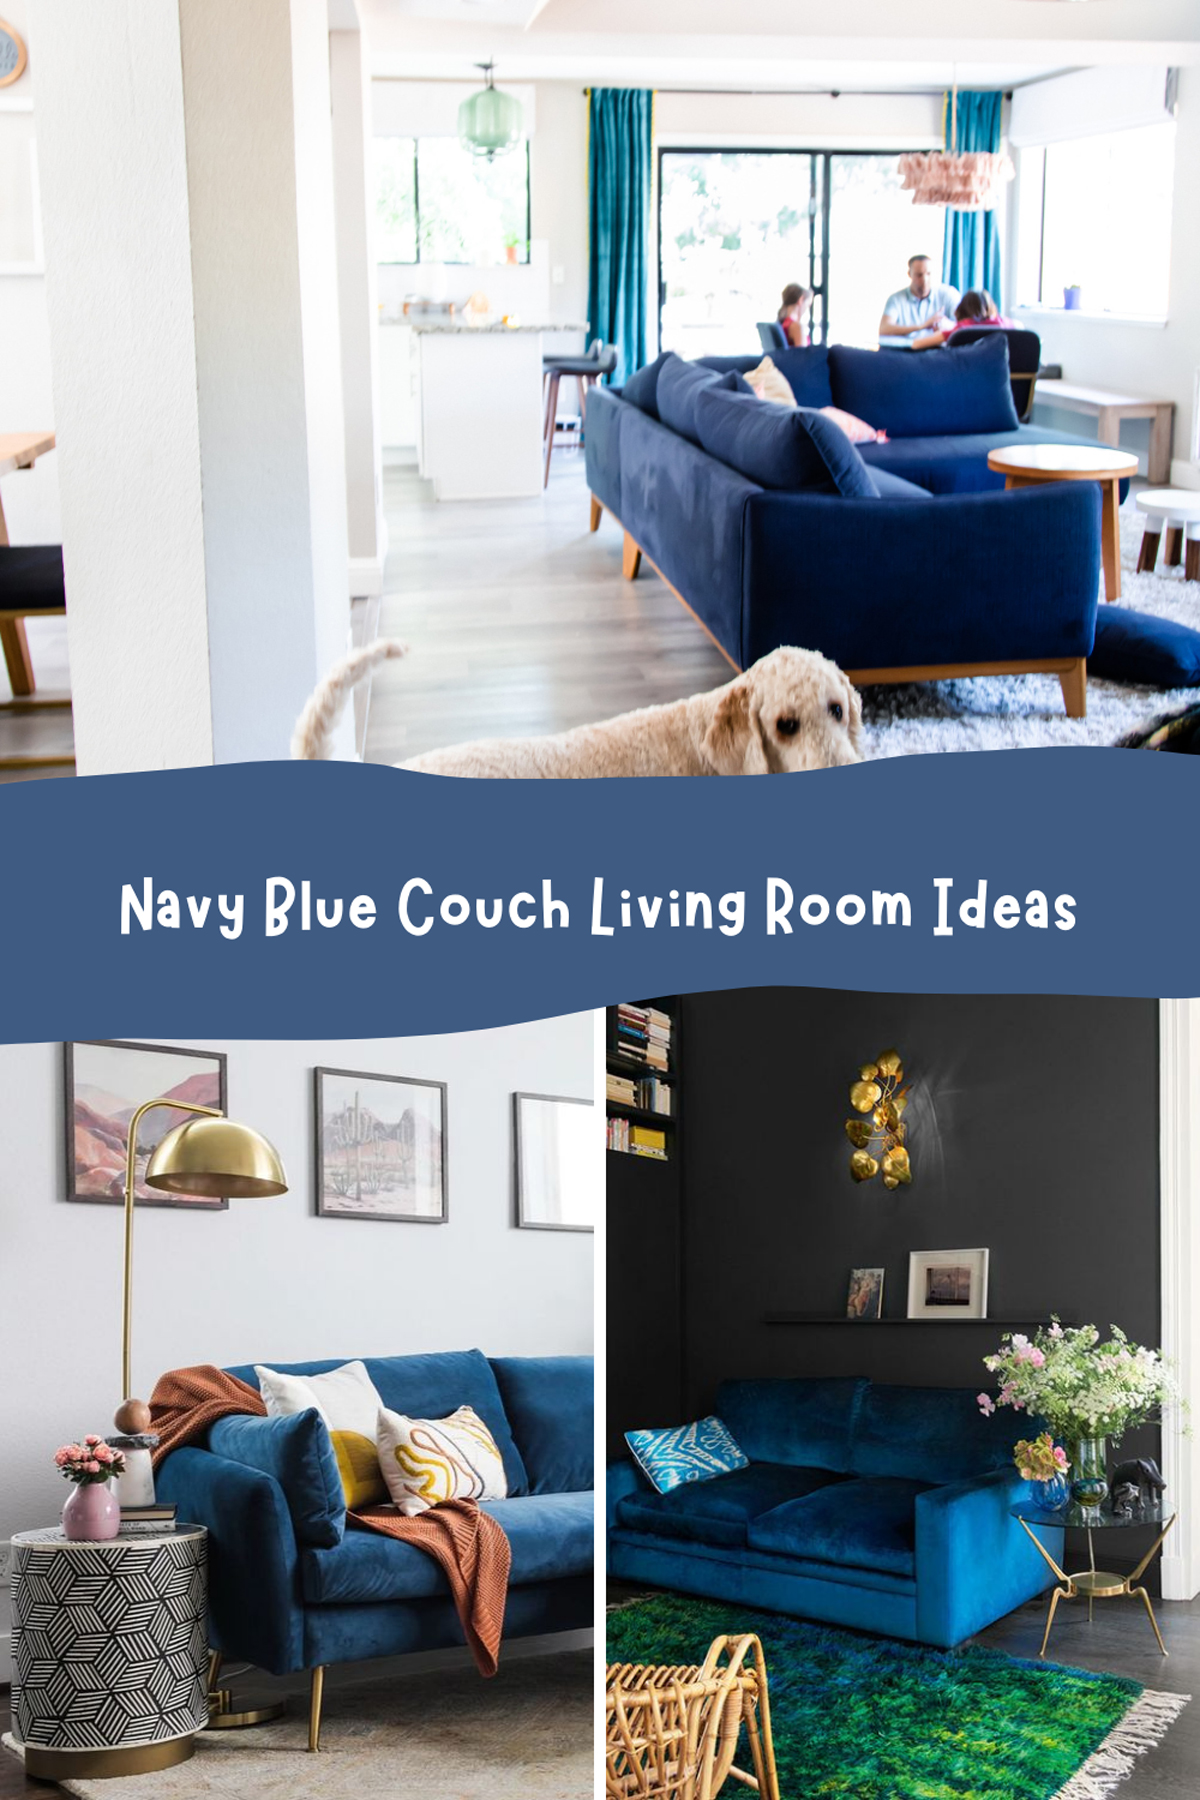 NavyBlue Couch Living Room Ideas